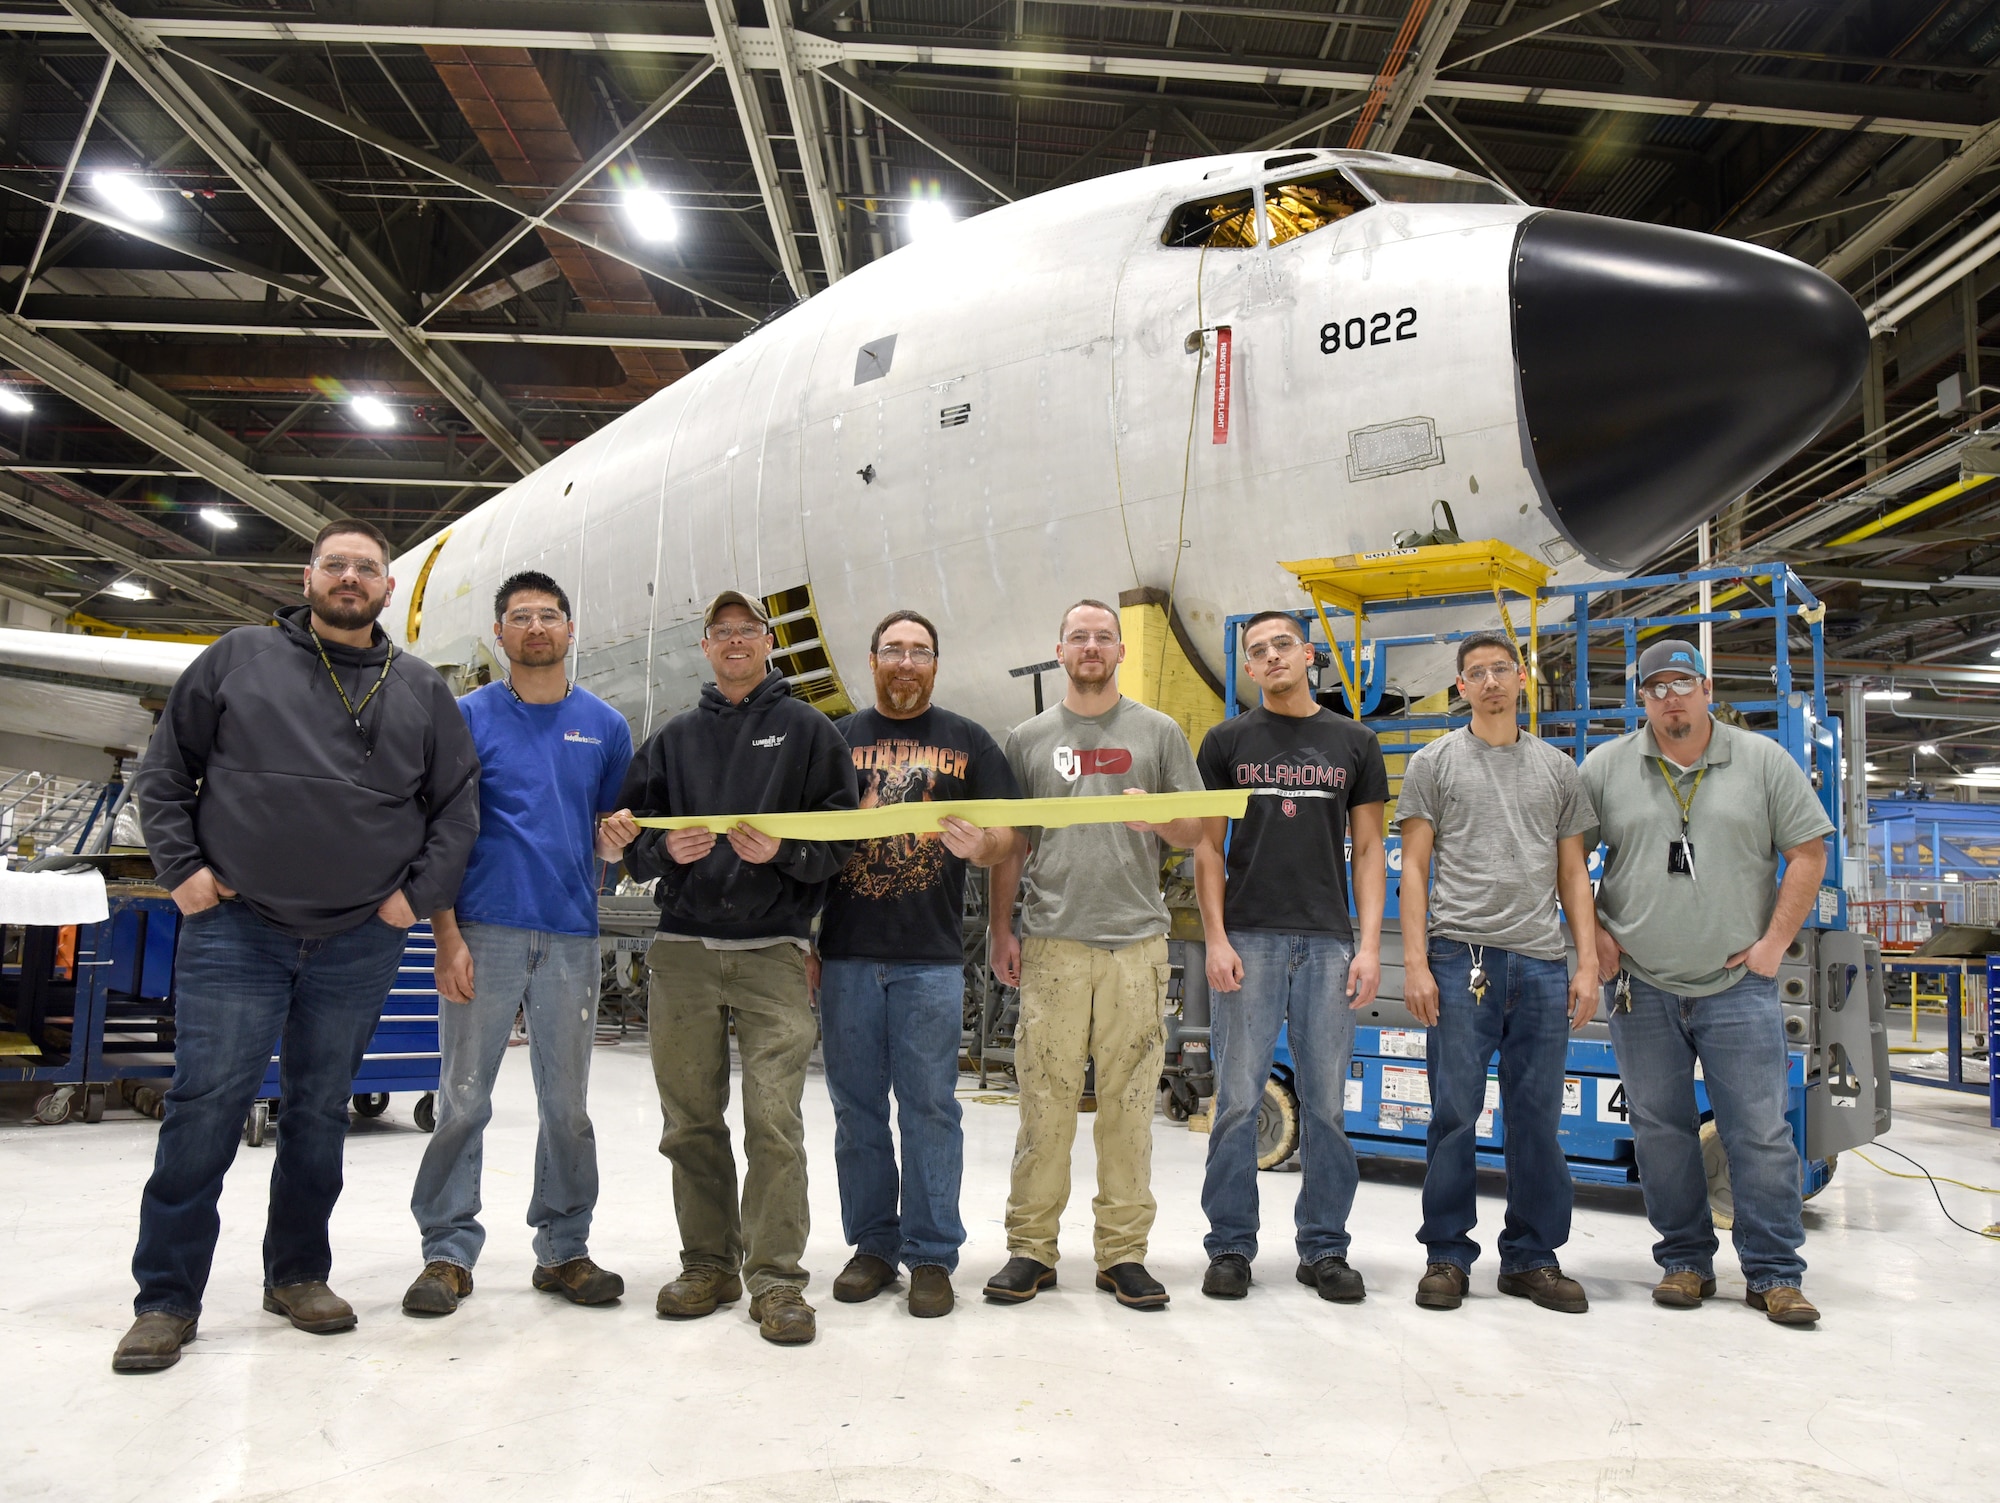 From left, Justin Herndon, Jaime Espinoza, Robert Ingraham, David Matthis, Tyler Smith, Linn Deer, Isaac Leija, Justin Henthorn and Russell Strangfeld (not pictured) made up the team of 564th Aircraft Maintenance Squadron sheet metal mechanics who worked to remove and reattach the keel beams from each of the KC-135 Stratotankers. (U.S. Air Force photo/Kelly White)